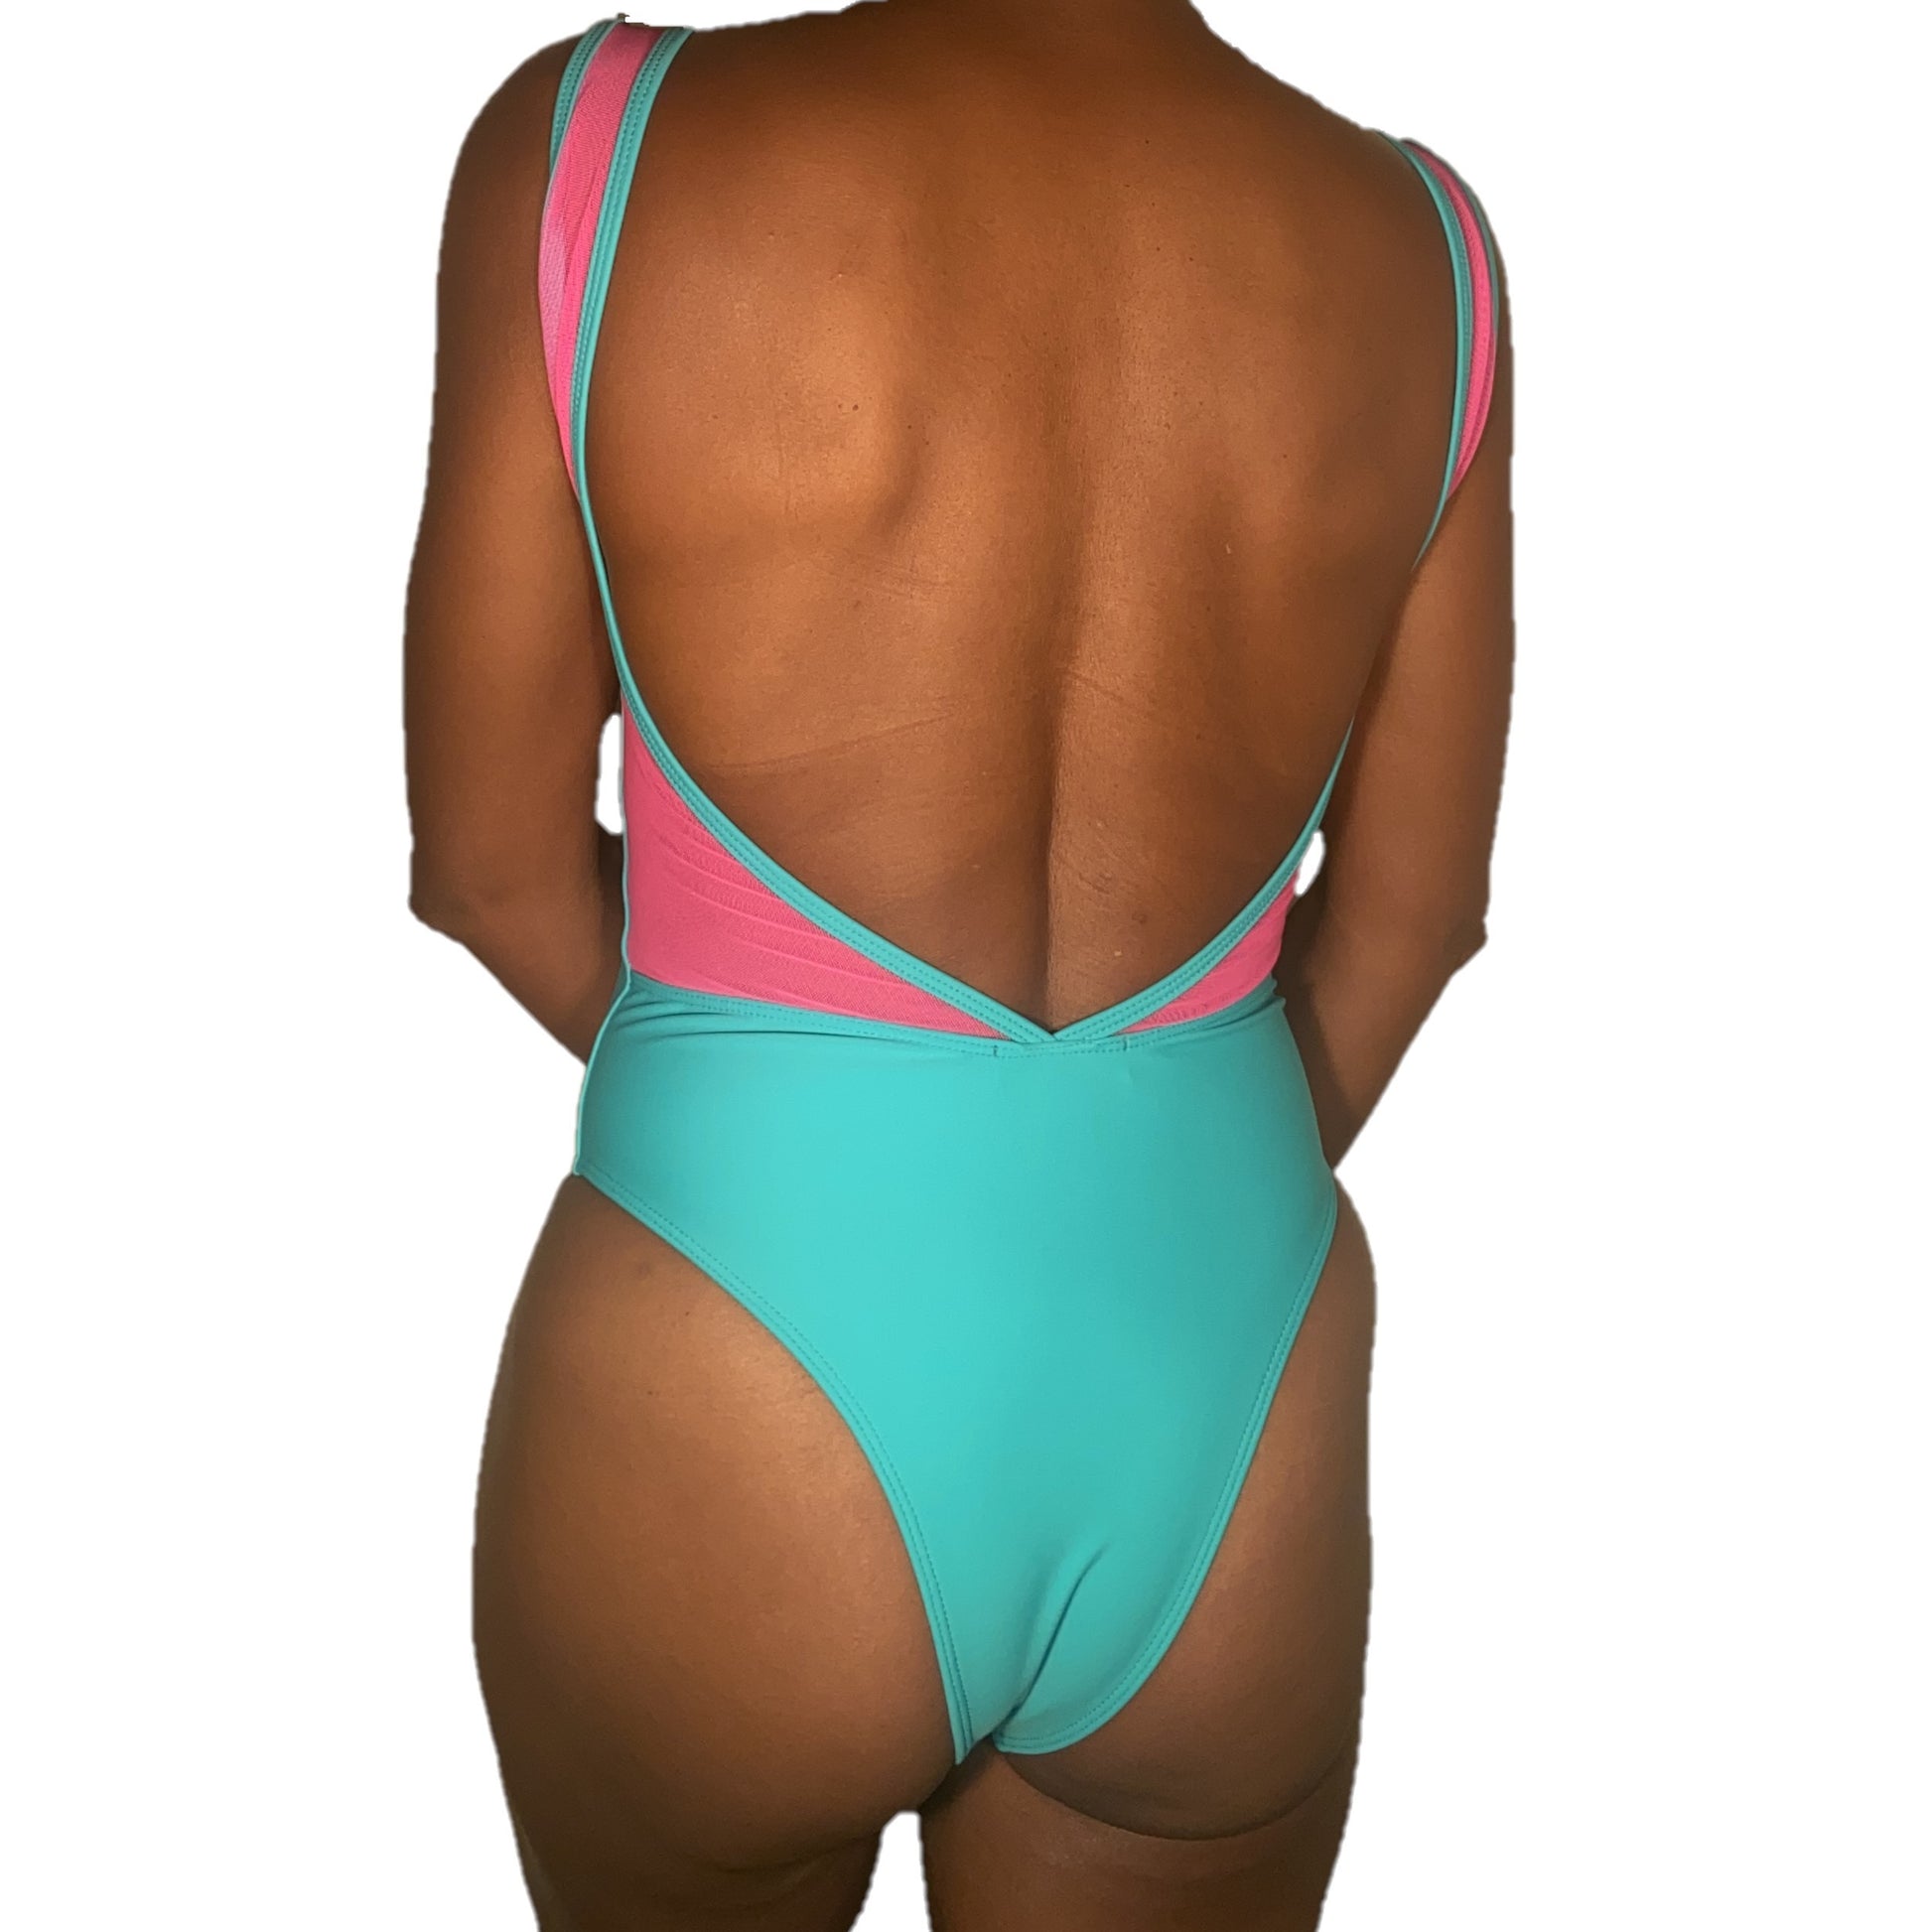 Cabana One Piece with Mesh in Aqua x Hot Pink